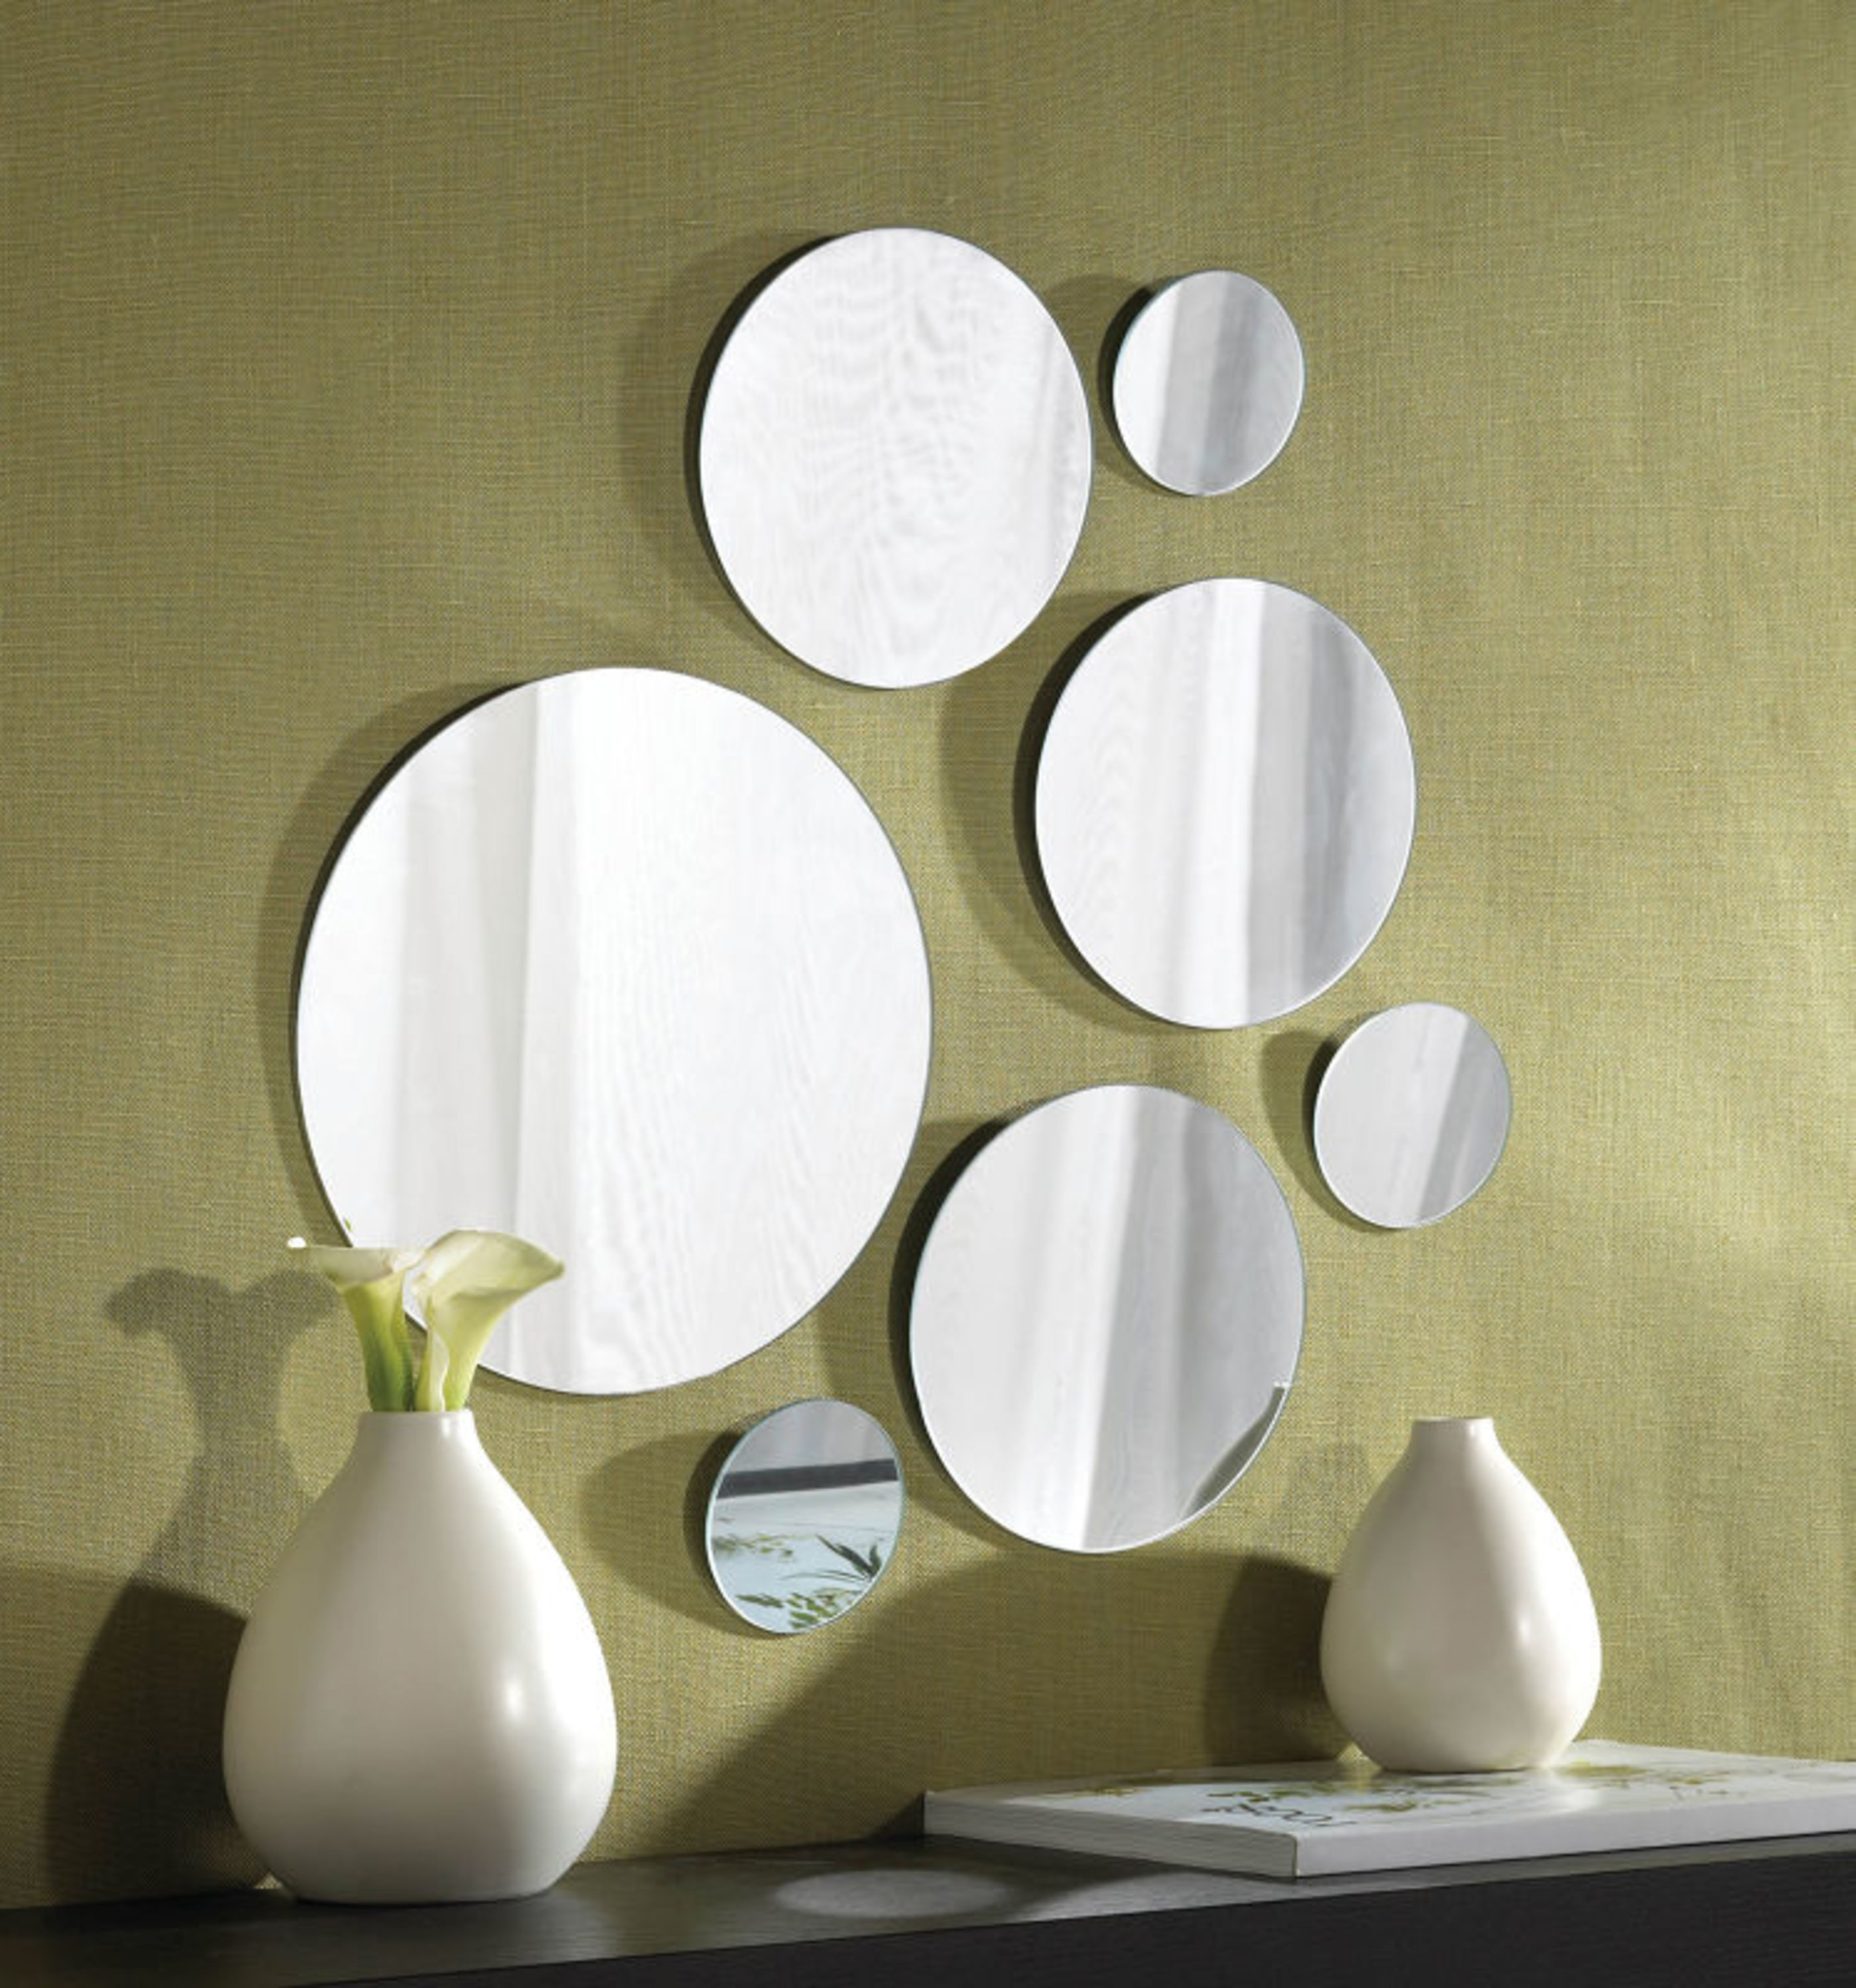 Elements Set of 7 Round Mirrors, 9-inch, 6-inch and 3-inch - image 2 of 4